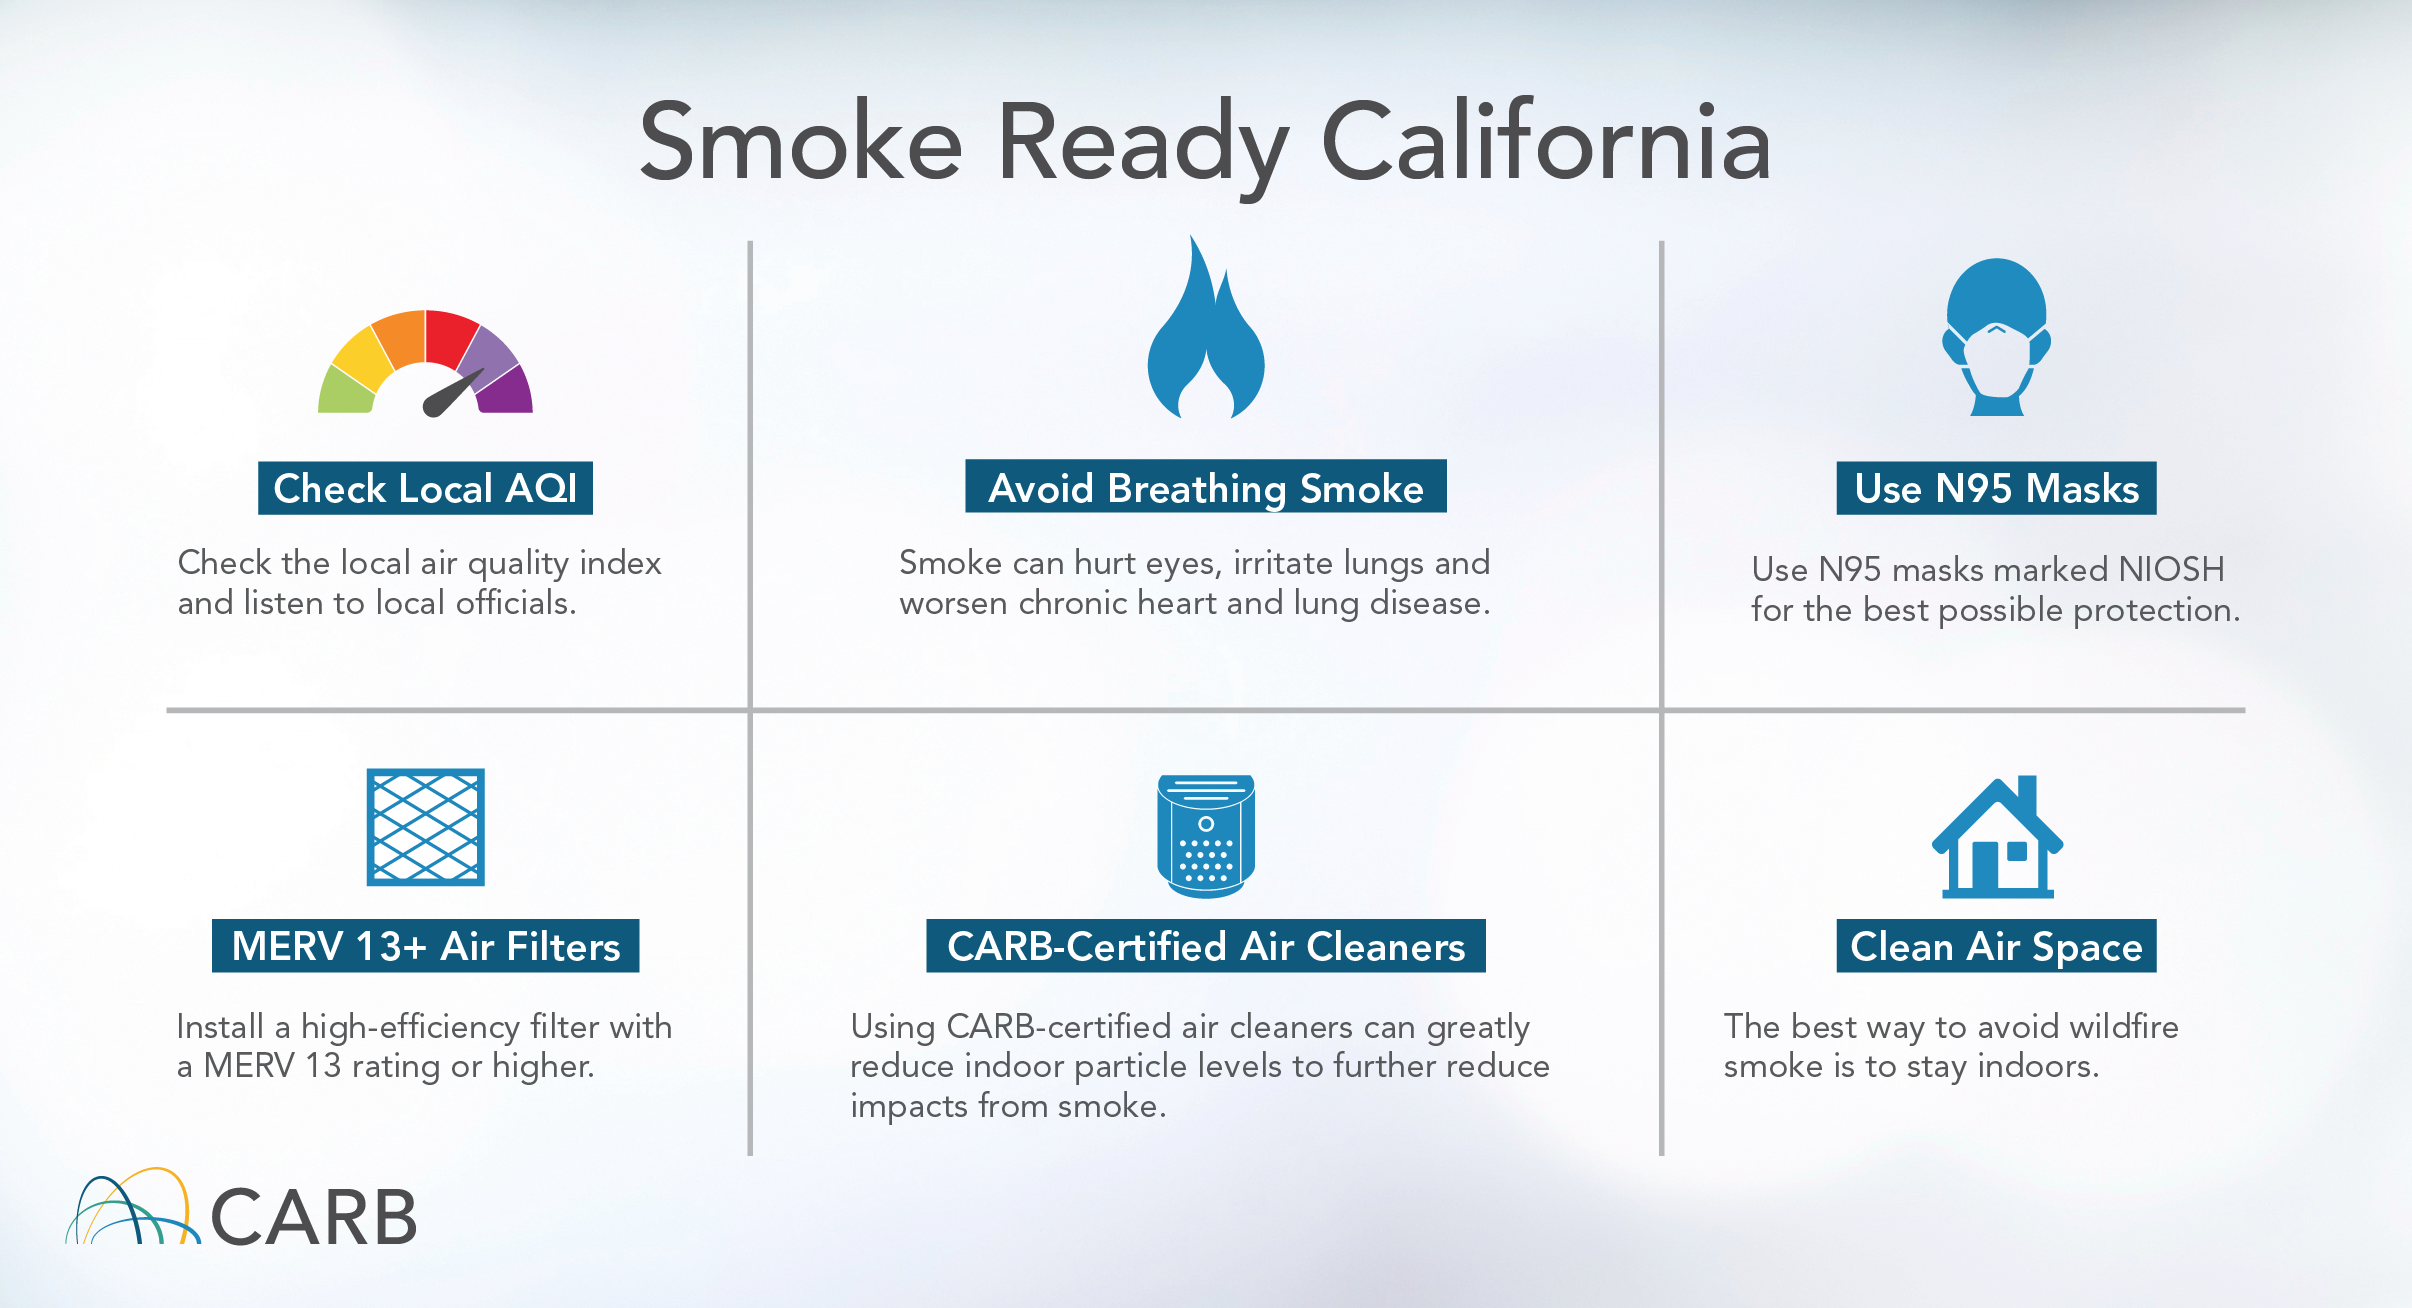 Smoke Ready California Check Local AQI: Check local air quality index levels and listen to local officials. Avoid Breathing Smoke: Smoke can hurt eyes, irritate lungs and worsen chronic heart and lung disease. Use N95 Masks: Use N95 masks marked NIOSH for the best possible protection. MERV 13+ Air Filters: Install a high-efficiency filter with a MERV 13 rating or higher. CARB-Certified Air Cleaners: Using CARB-certified air cleaners can greatly reduce indoor particle levels to further reduce impacts from smoke. Clean Air Space: The best way to avoid wildfire smoke is to stay indoors.